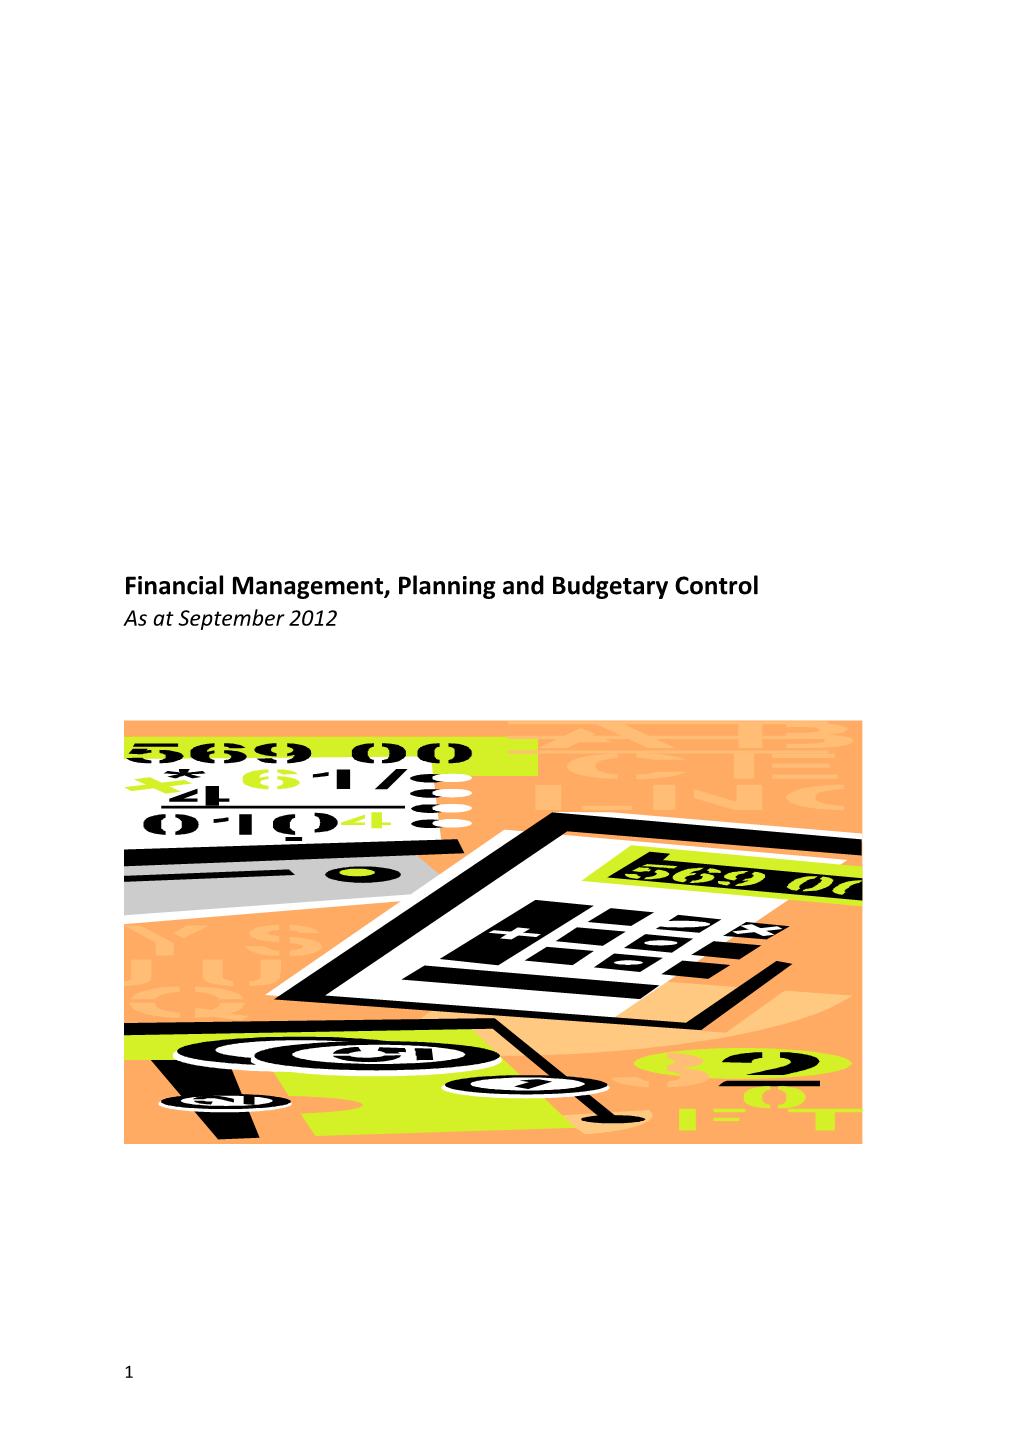 Financial Management, Planning and Budgetary Control